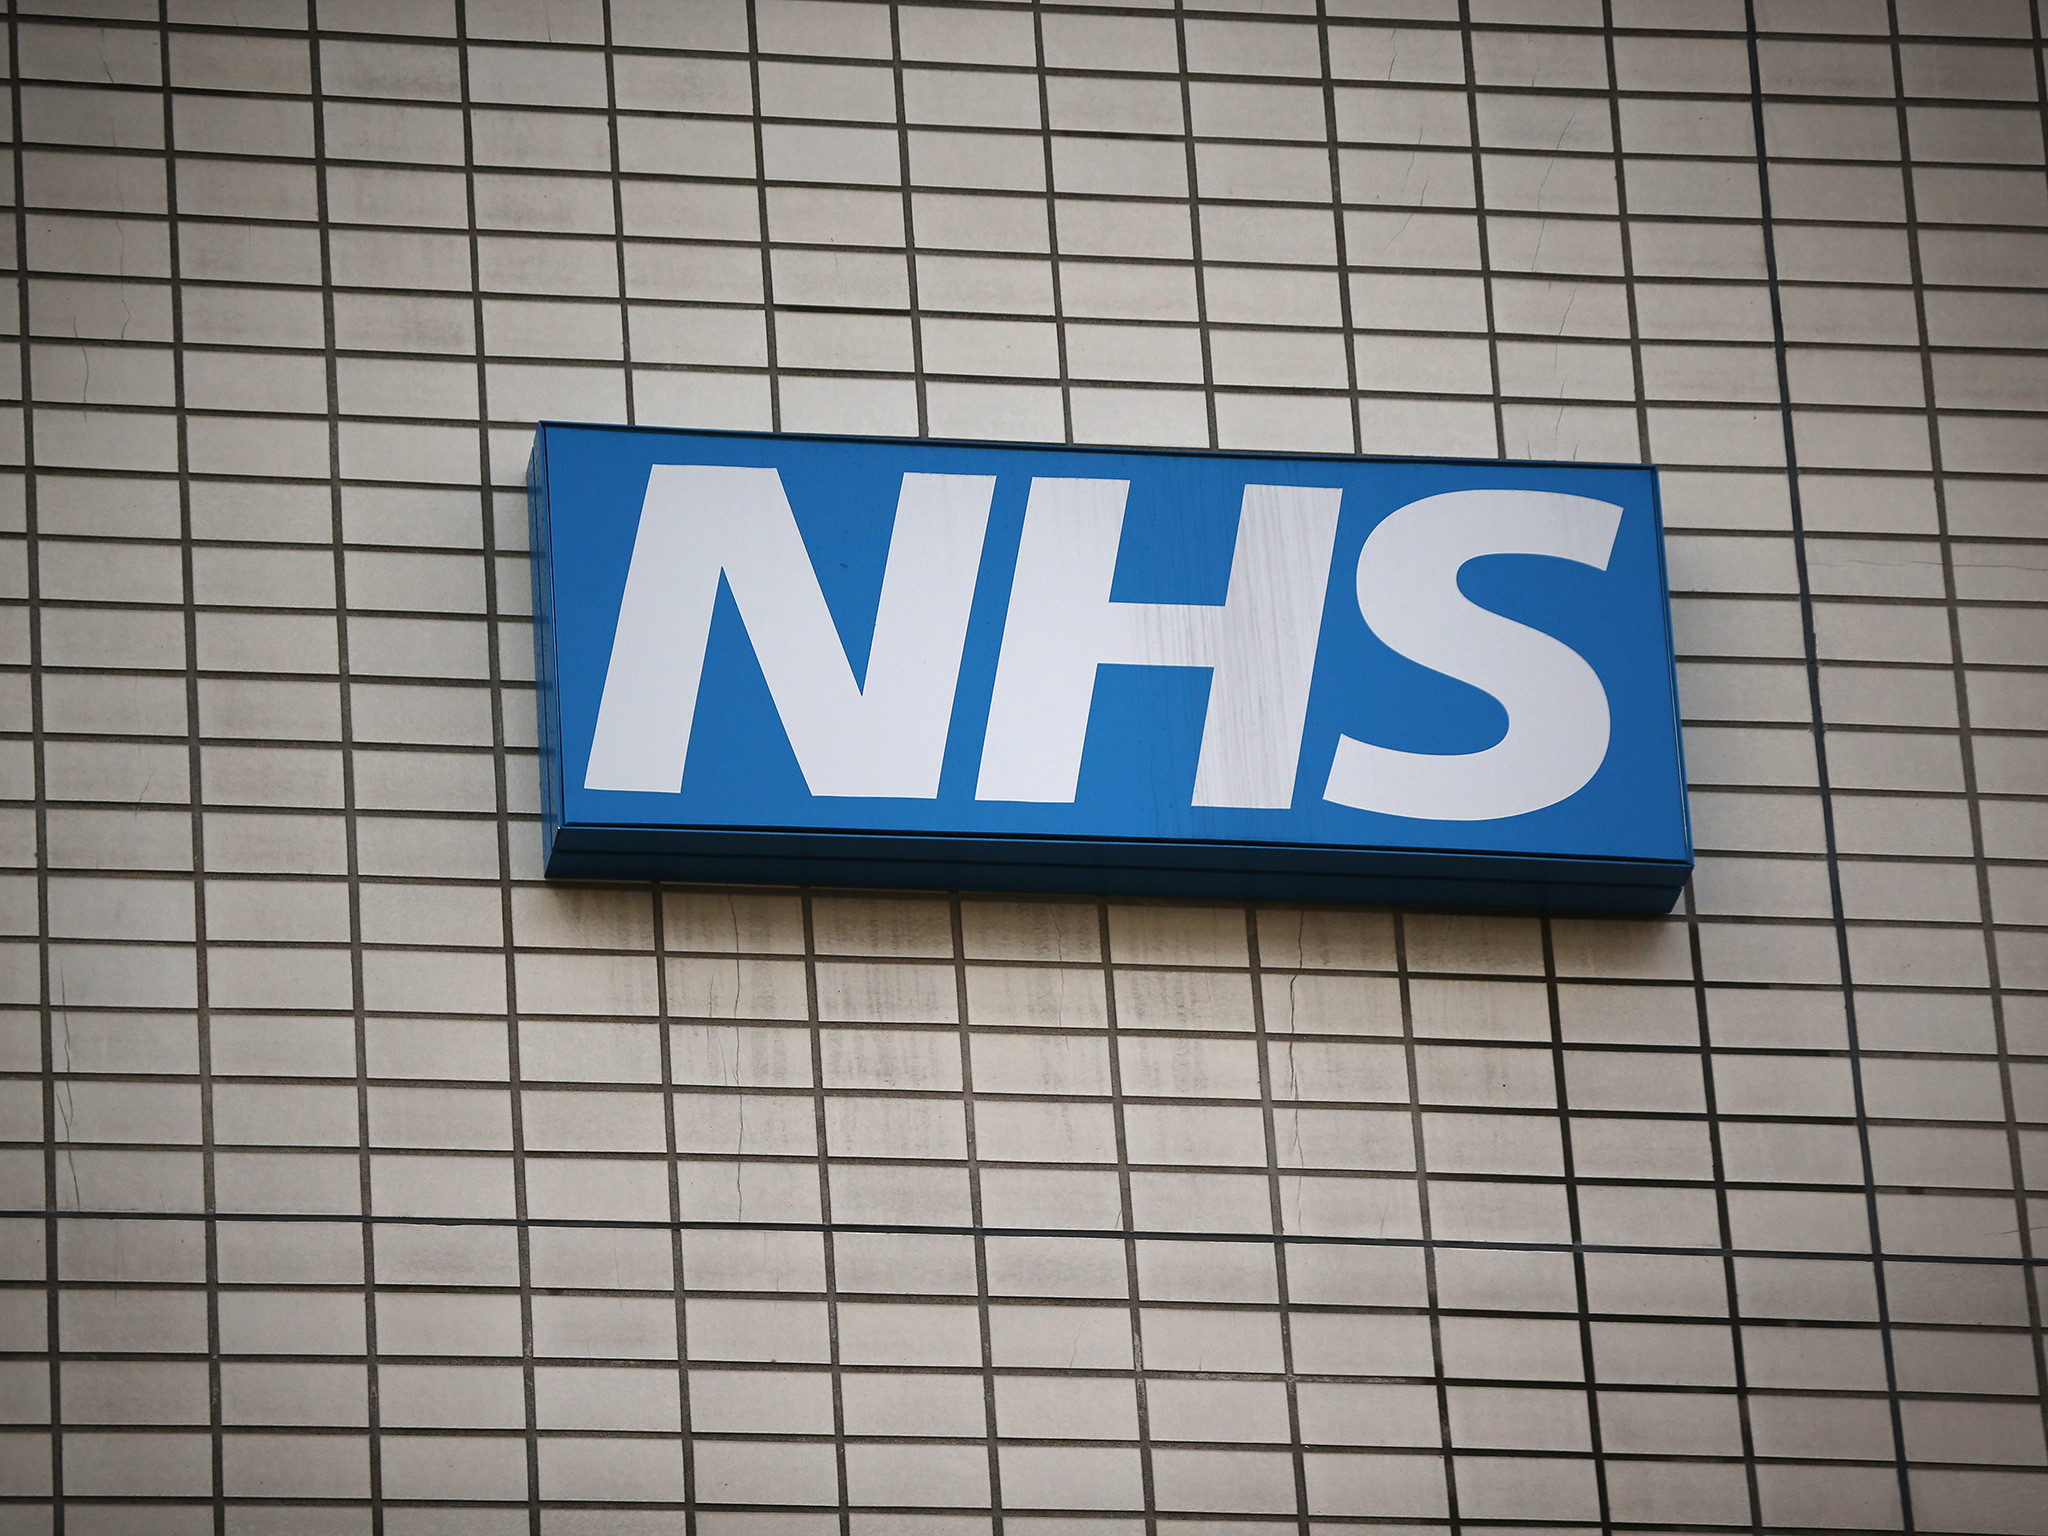 2048x1536 The NHS is not treating transgender people equally with other